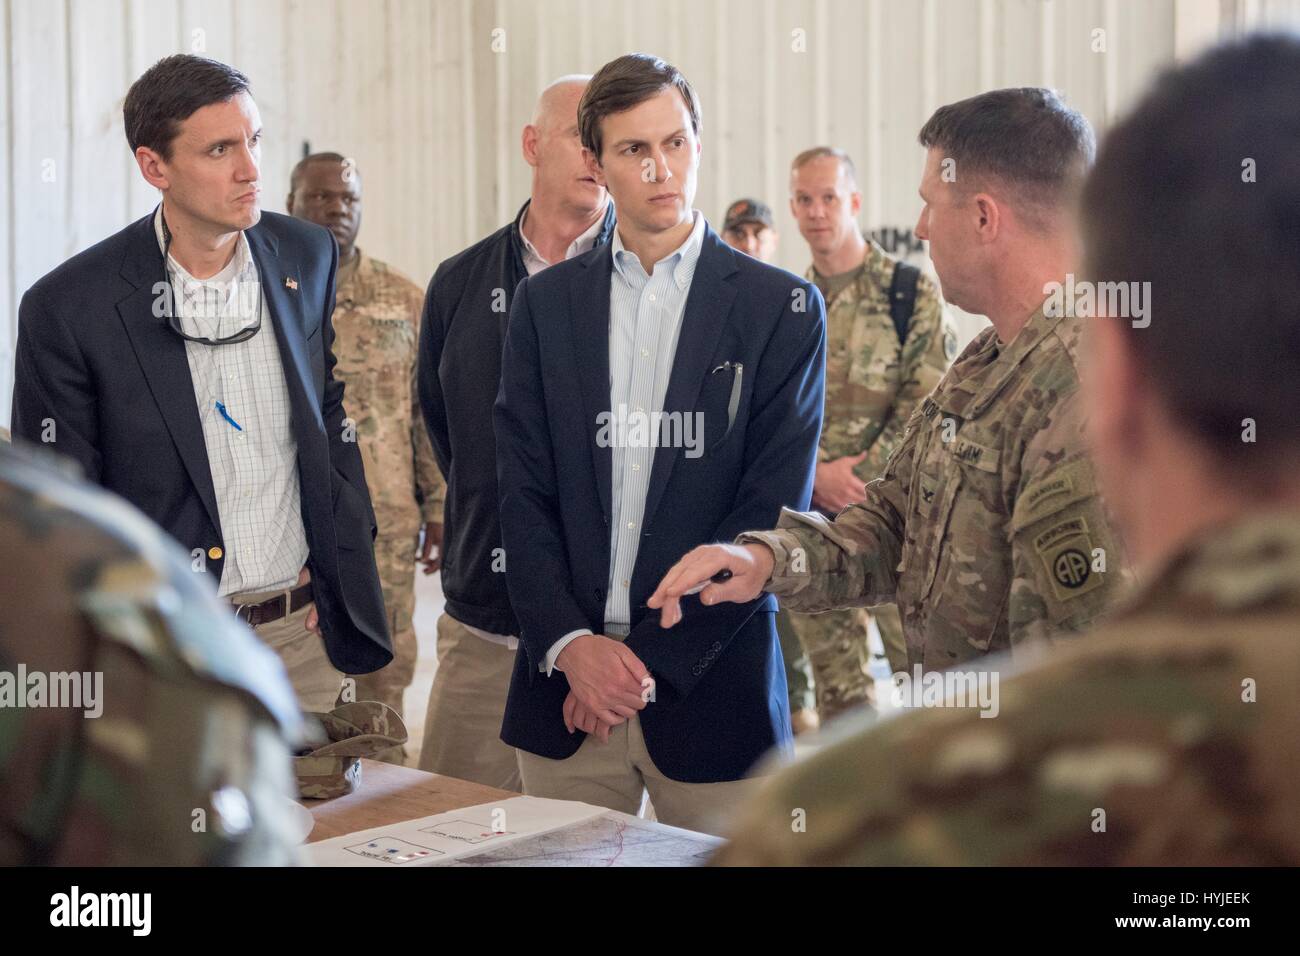 Qayyarah West, Iraq. 4th Apr, 2017. Jared Kushner, Senior Advisor and son-in-law to President Trump, center, and homeland security advisor Tom Bossert, left, receive a briefing from Colonel Patrick Work, commander of the 2nd Brigade, 82nd Airborne Division, during a visit to a forward operating base April 4, 2017 in near Qayyarah West, Iraq. Kushner accompanied Joint Chiefs Chairman Gen. Joseph Dunford in a visit to the front lines in the battle to recapture Mosul from the Islamic State. Credit: Planetpix/Alamy Live News Stock Photo